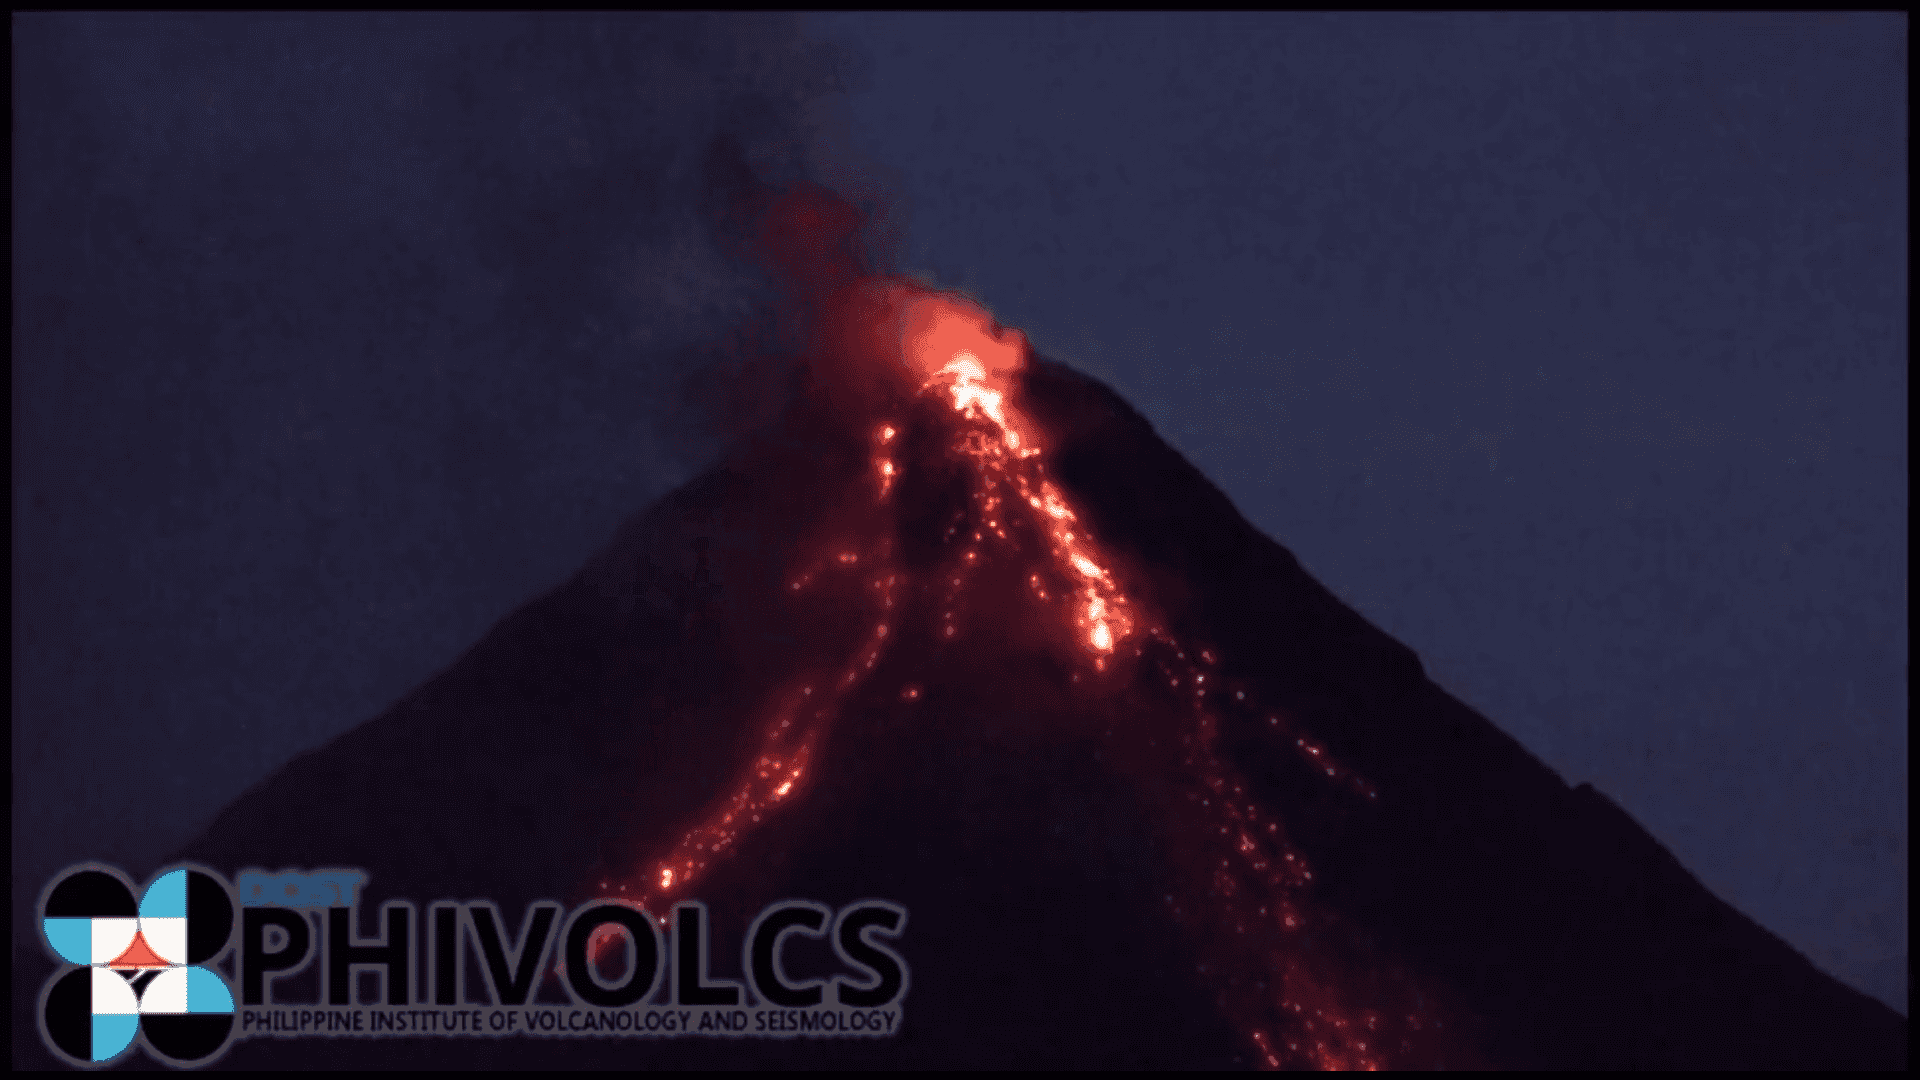 Phivolcs: Mayon Volcano’s seismic unrest continues to increase